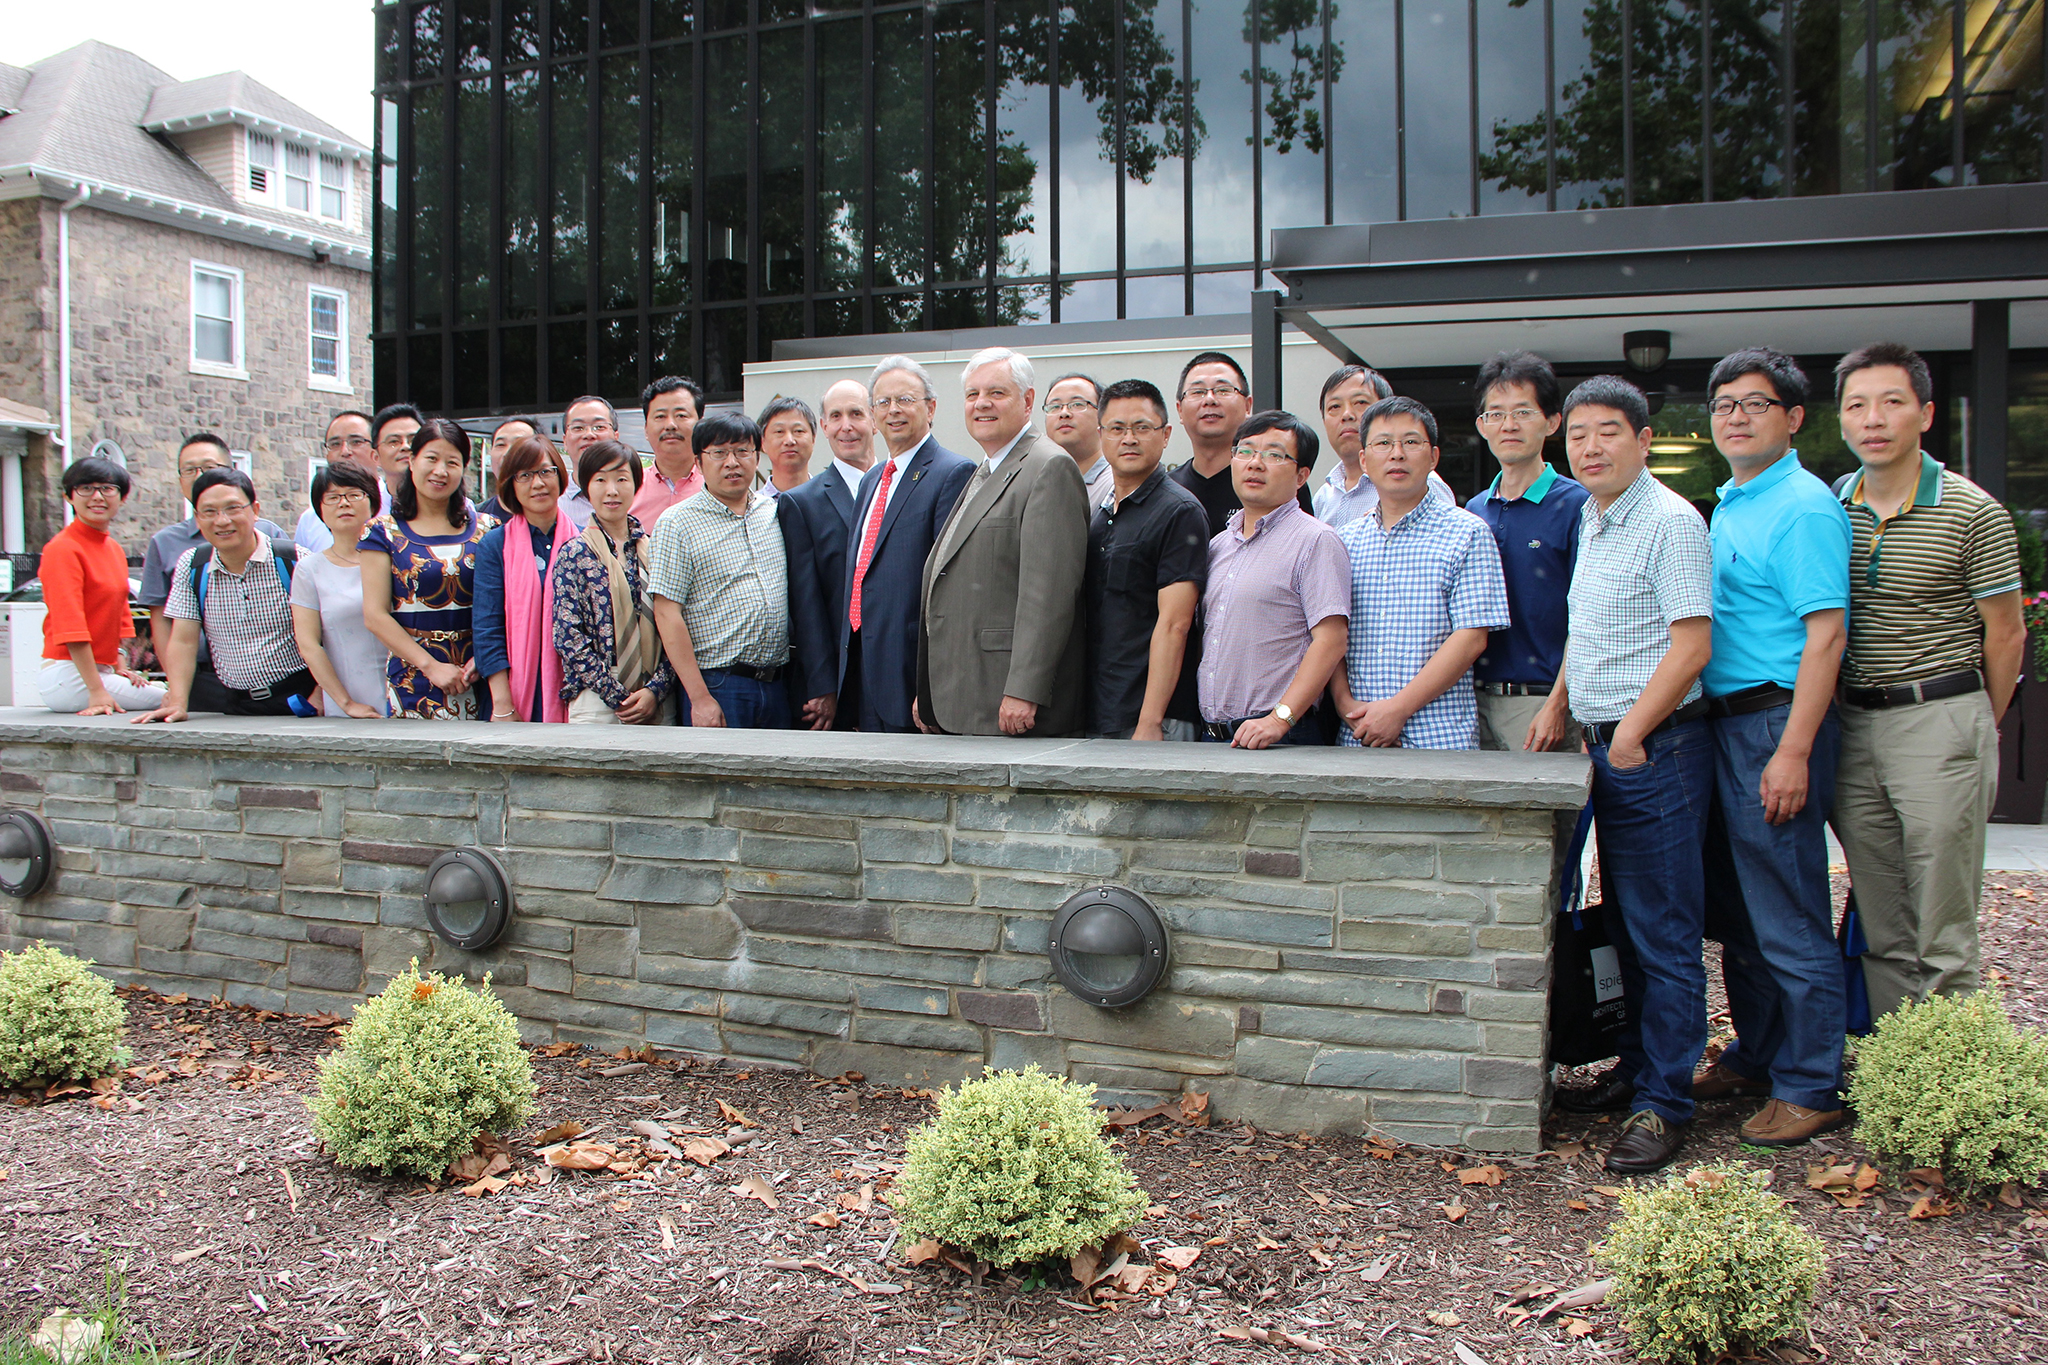 A delegation of Chinese school principals visited NJSBA headquarters in Trenton recently, to learn about New Jersey public schools and governance, during a trip to the United States. At NJSBA they took part in a lively discussion forum, and paused for a group photo before departing.